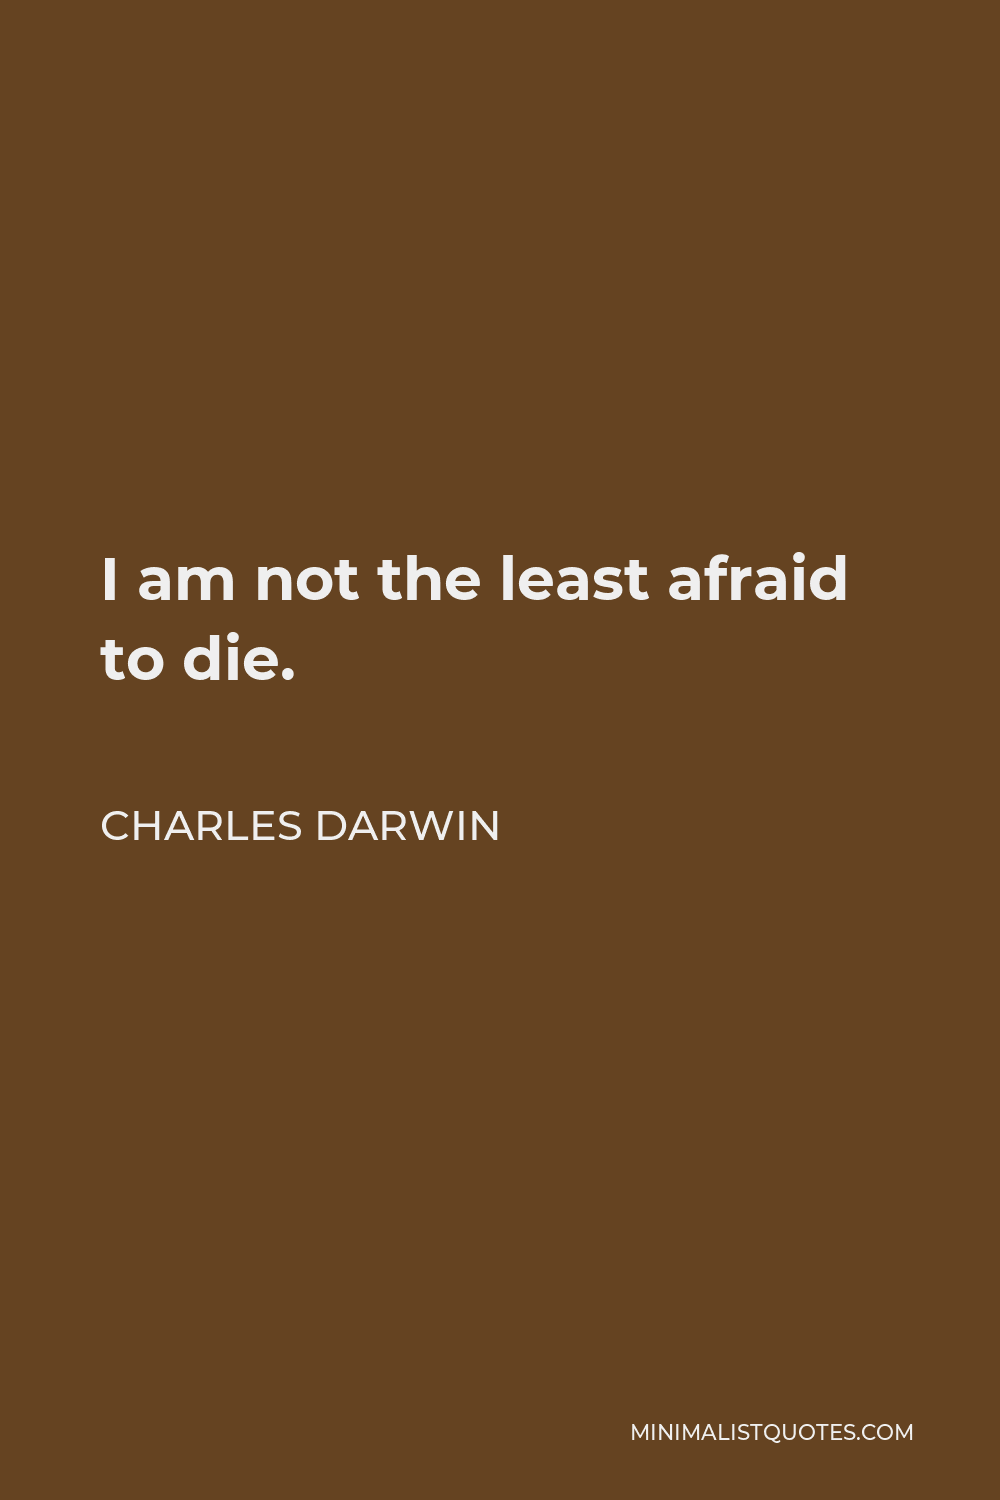 Charles Darwin Quote - I am not the least afraid to die.